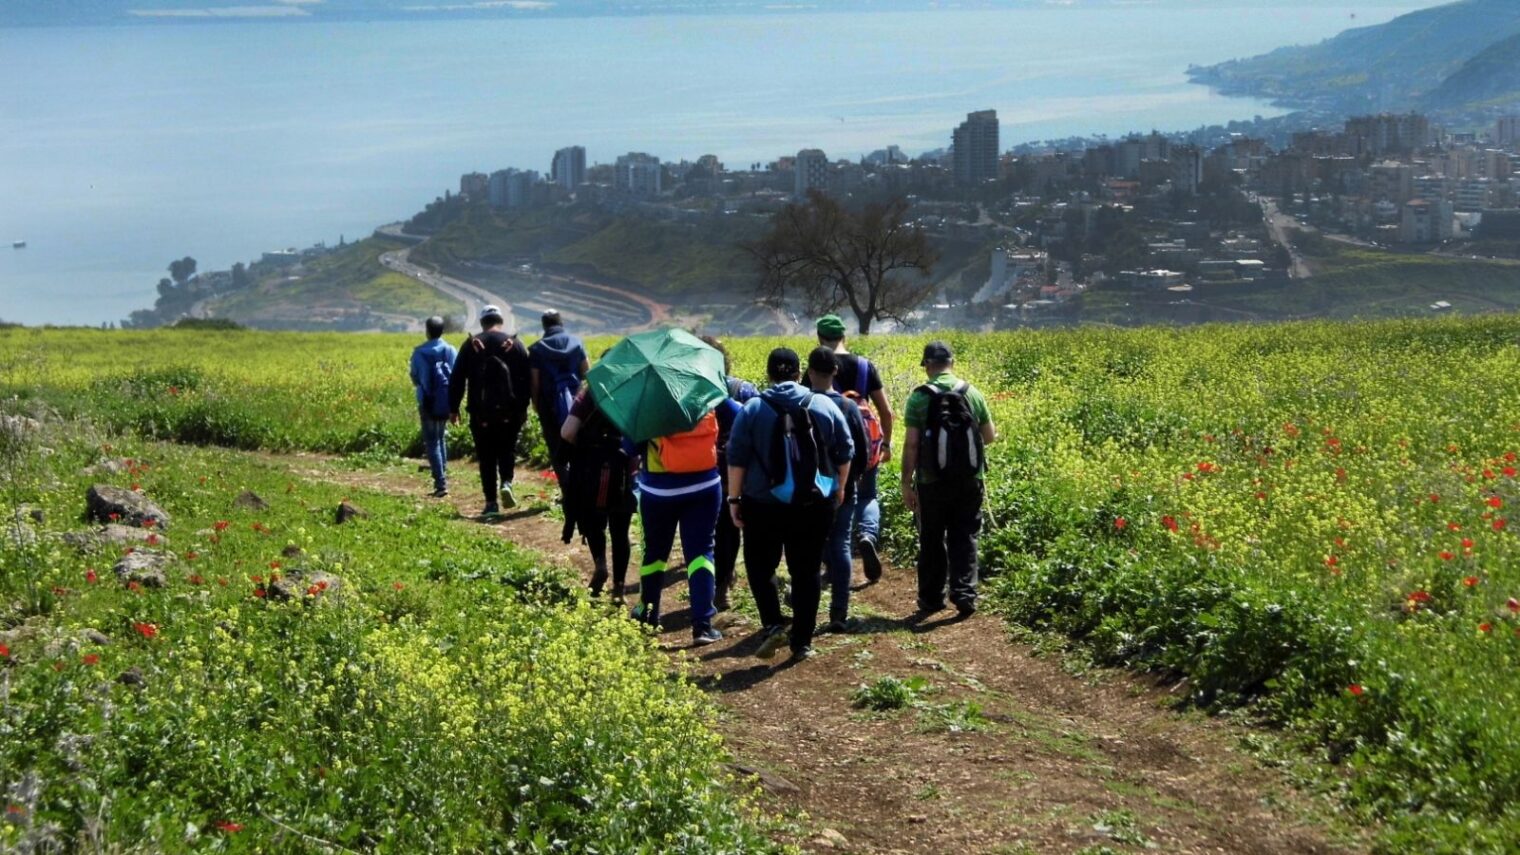 Walking the planned route of the Sanhedrin Trail in the Galilee. Photo by Gilad Cinamon/Israel Antiquities Authority